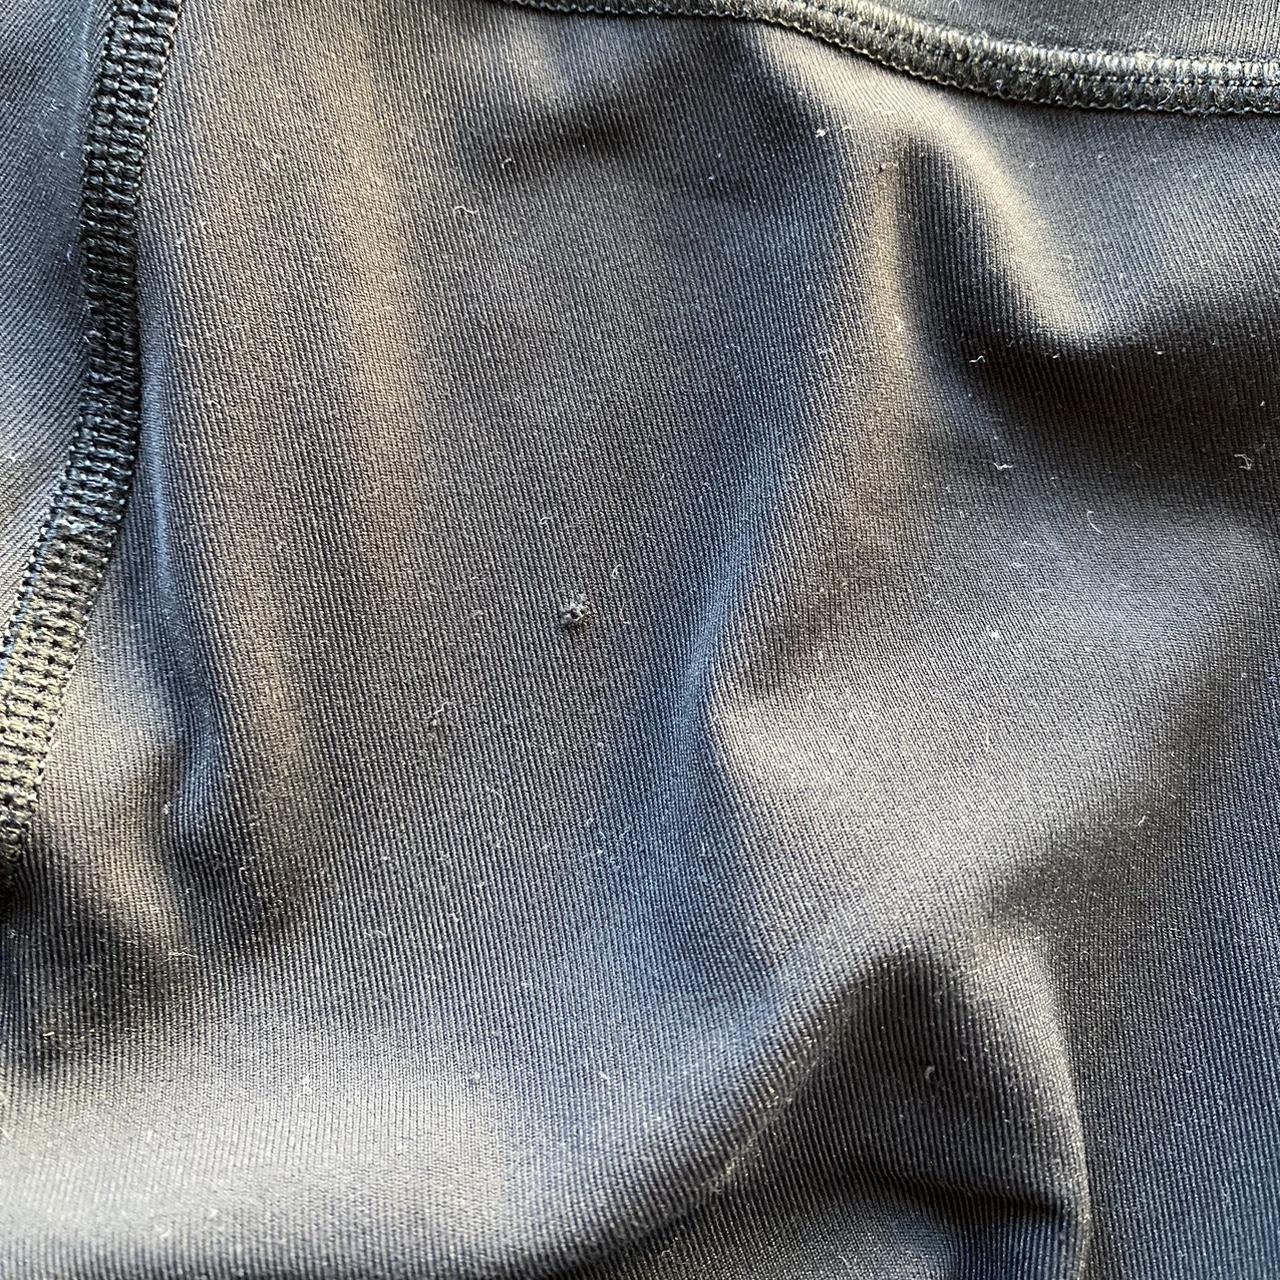 Lululemon 6 Has a small hole on front thigh area :( - Depop